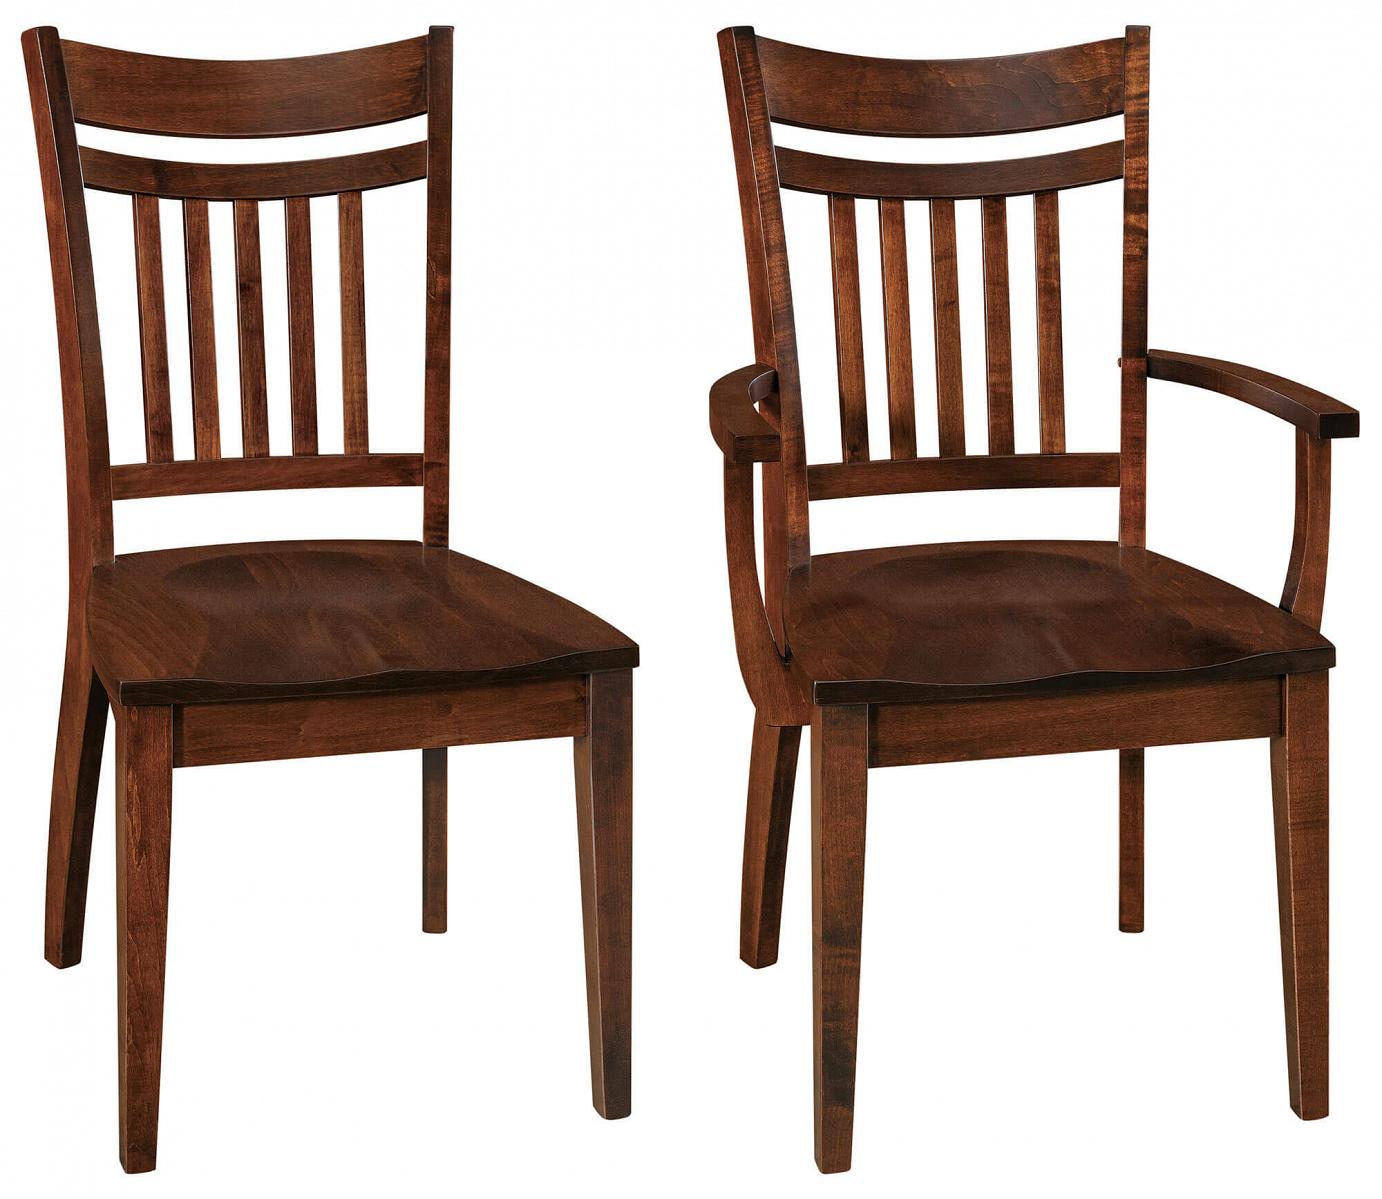 RH Yoder Arbordale Chairs